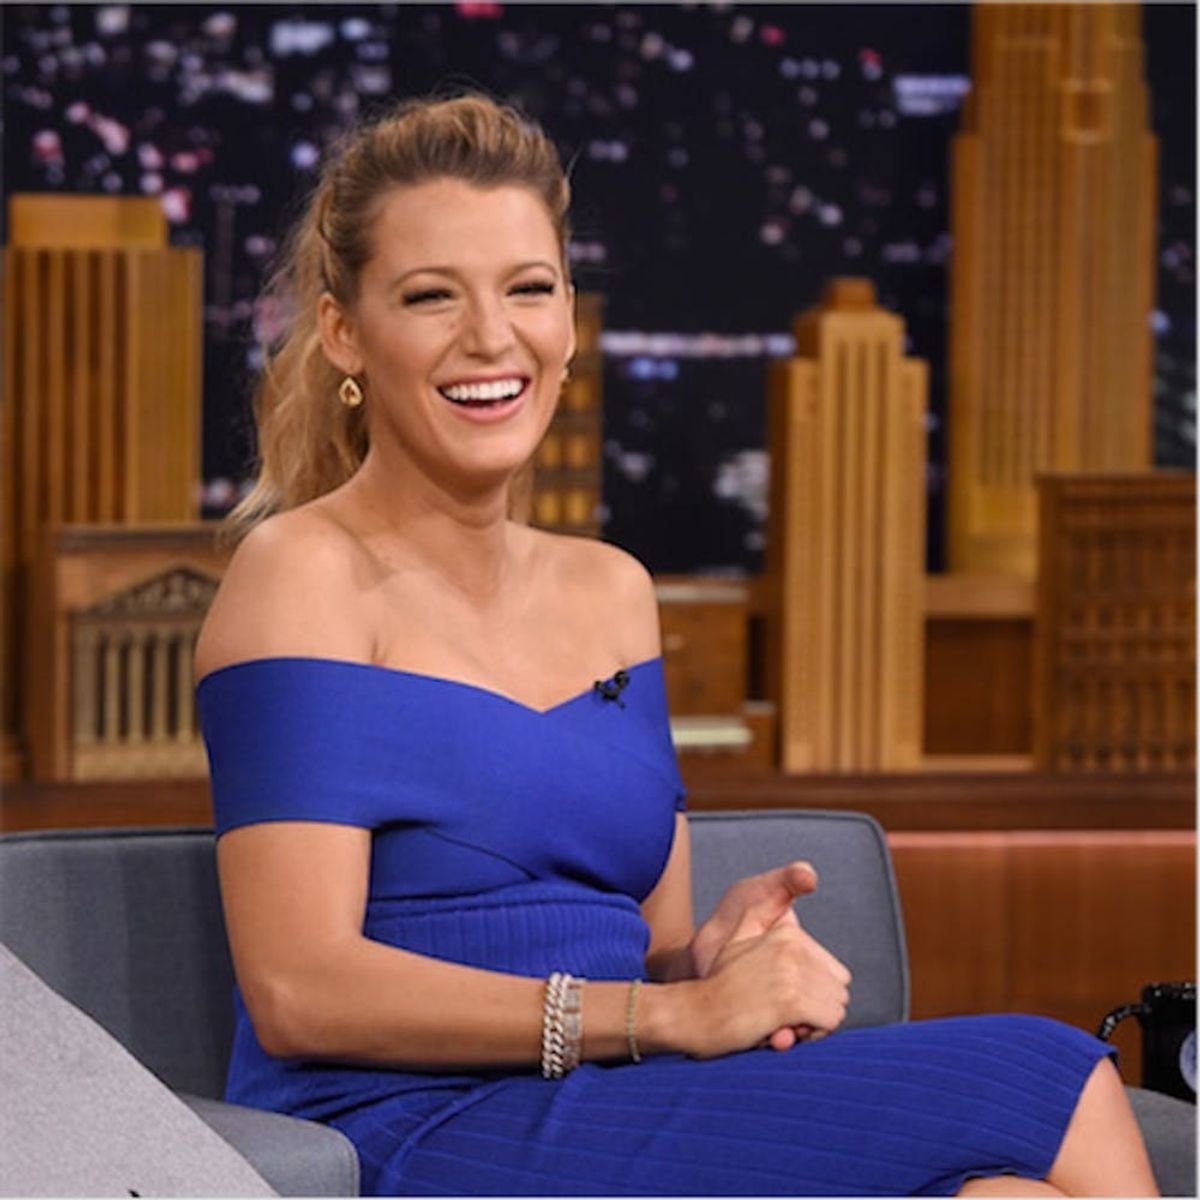 Morning Buzz! Blake Lively Just Outed Herself As a Bigger Harry Potter Nerd Than You + More